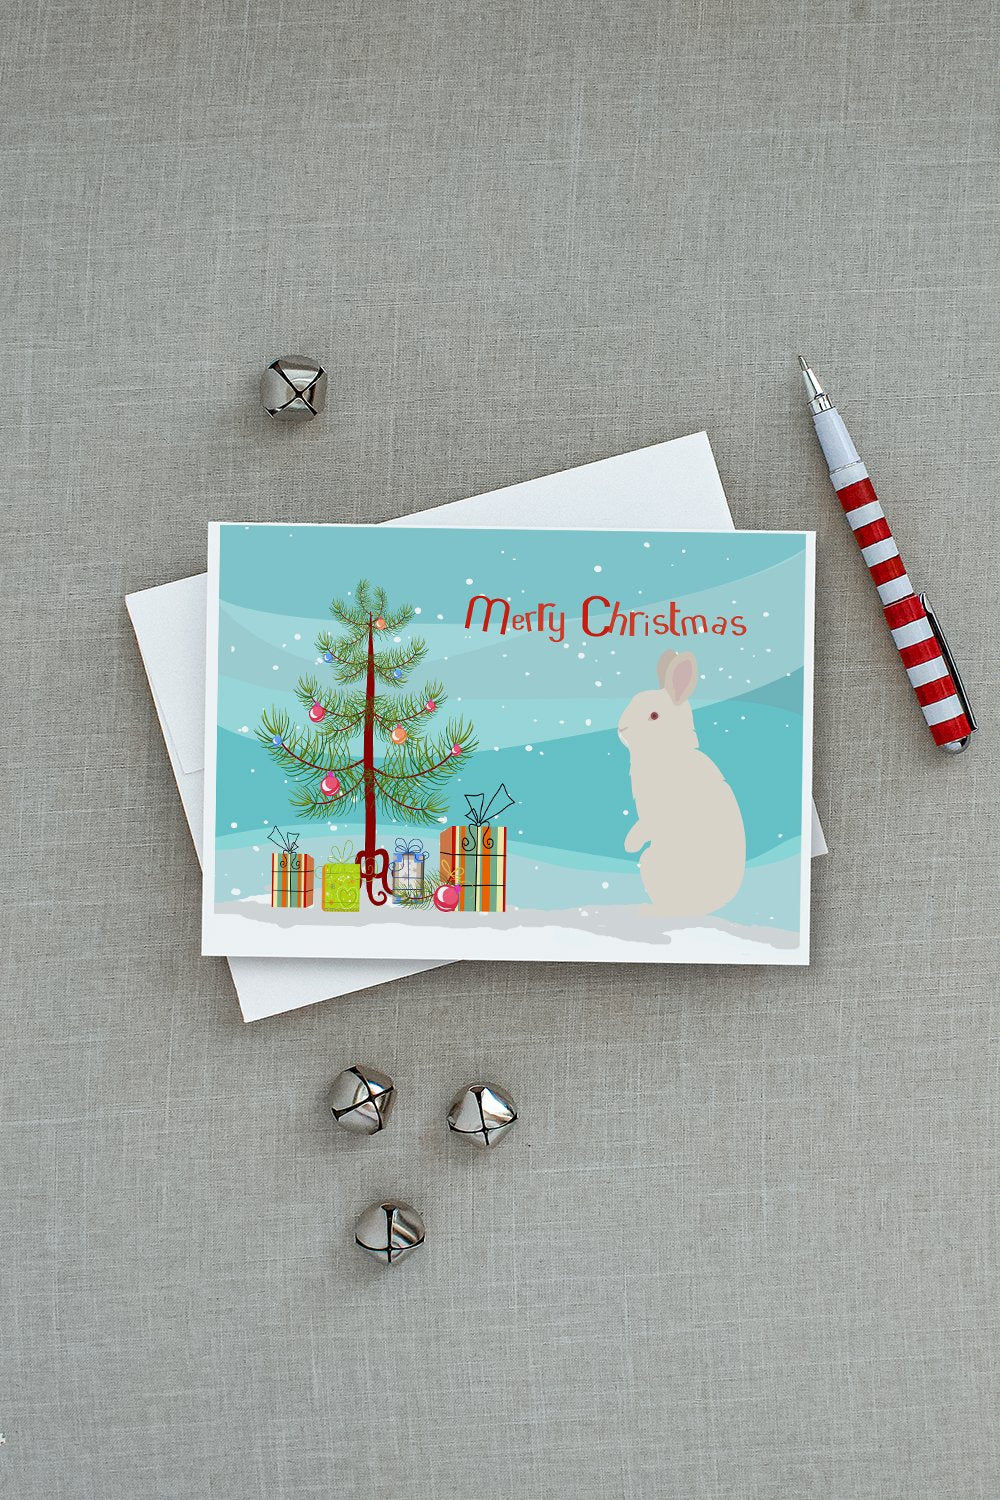 New Zealand White Rabbit Christmas Greeting Cards and Envelopes Pack of 8 - the-store.com